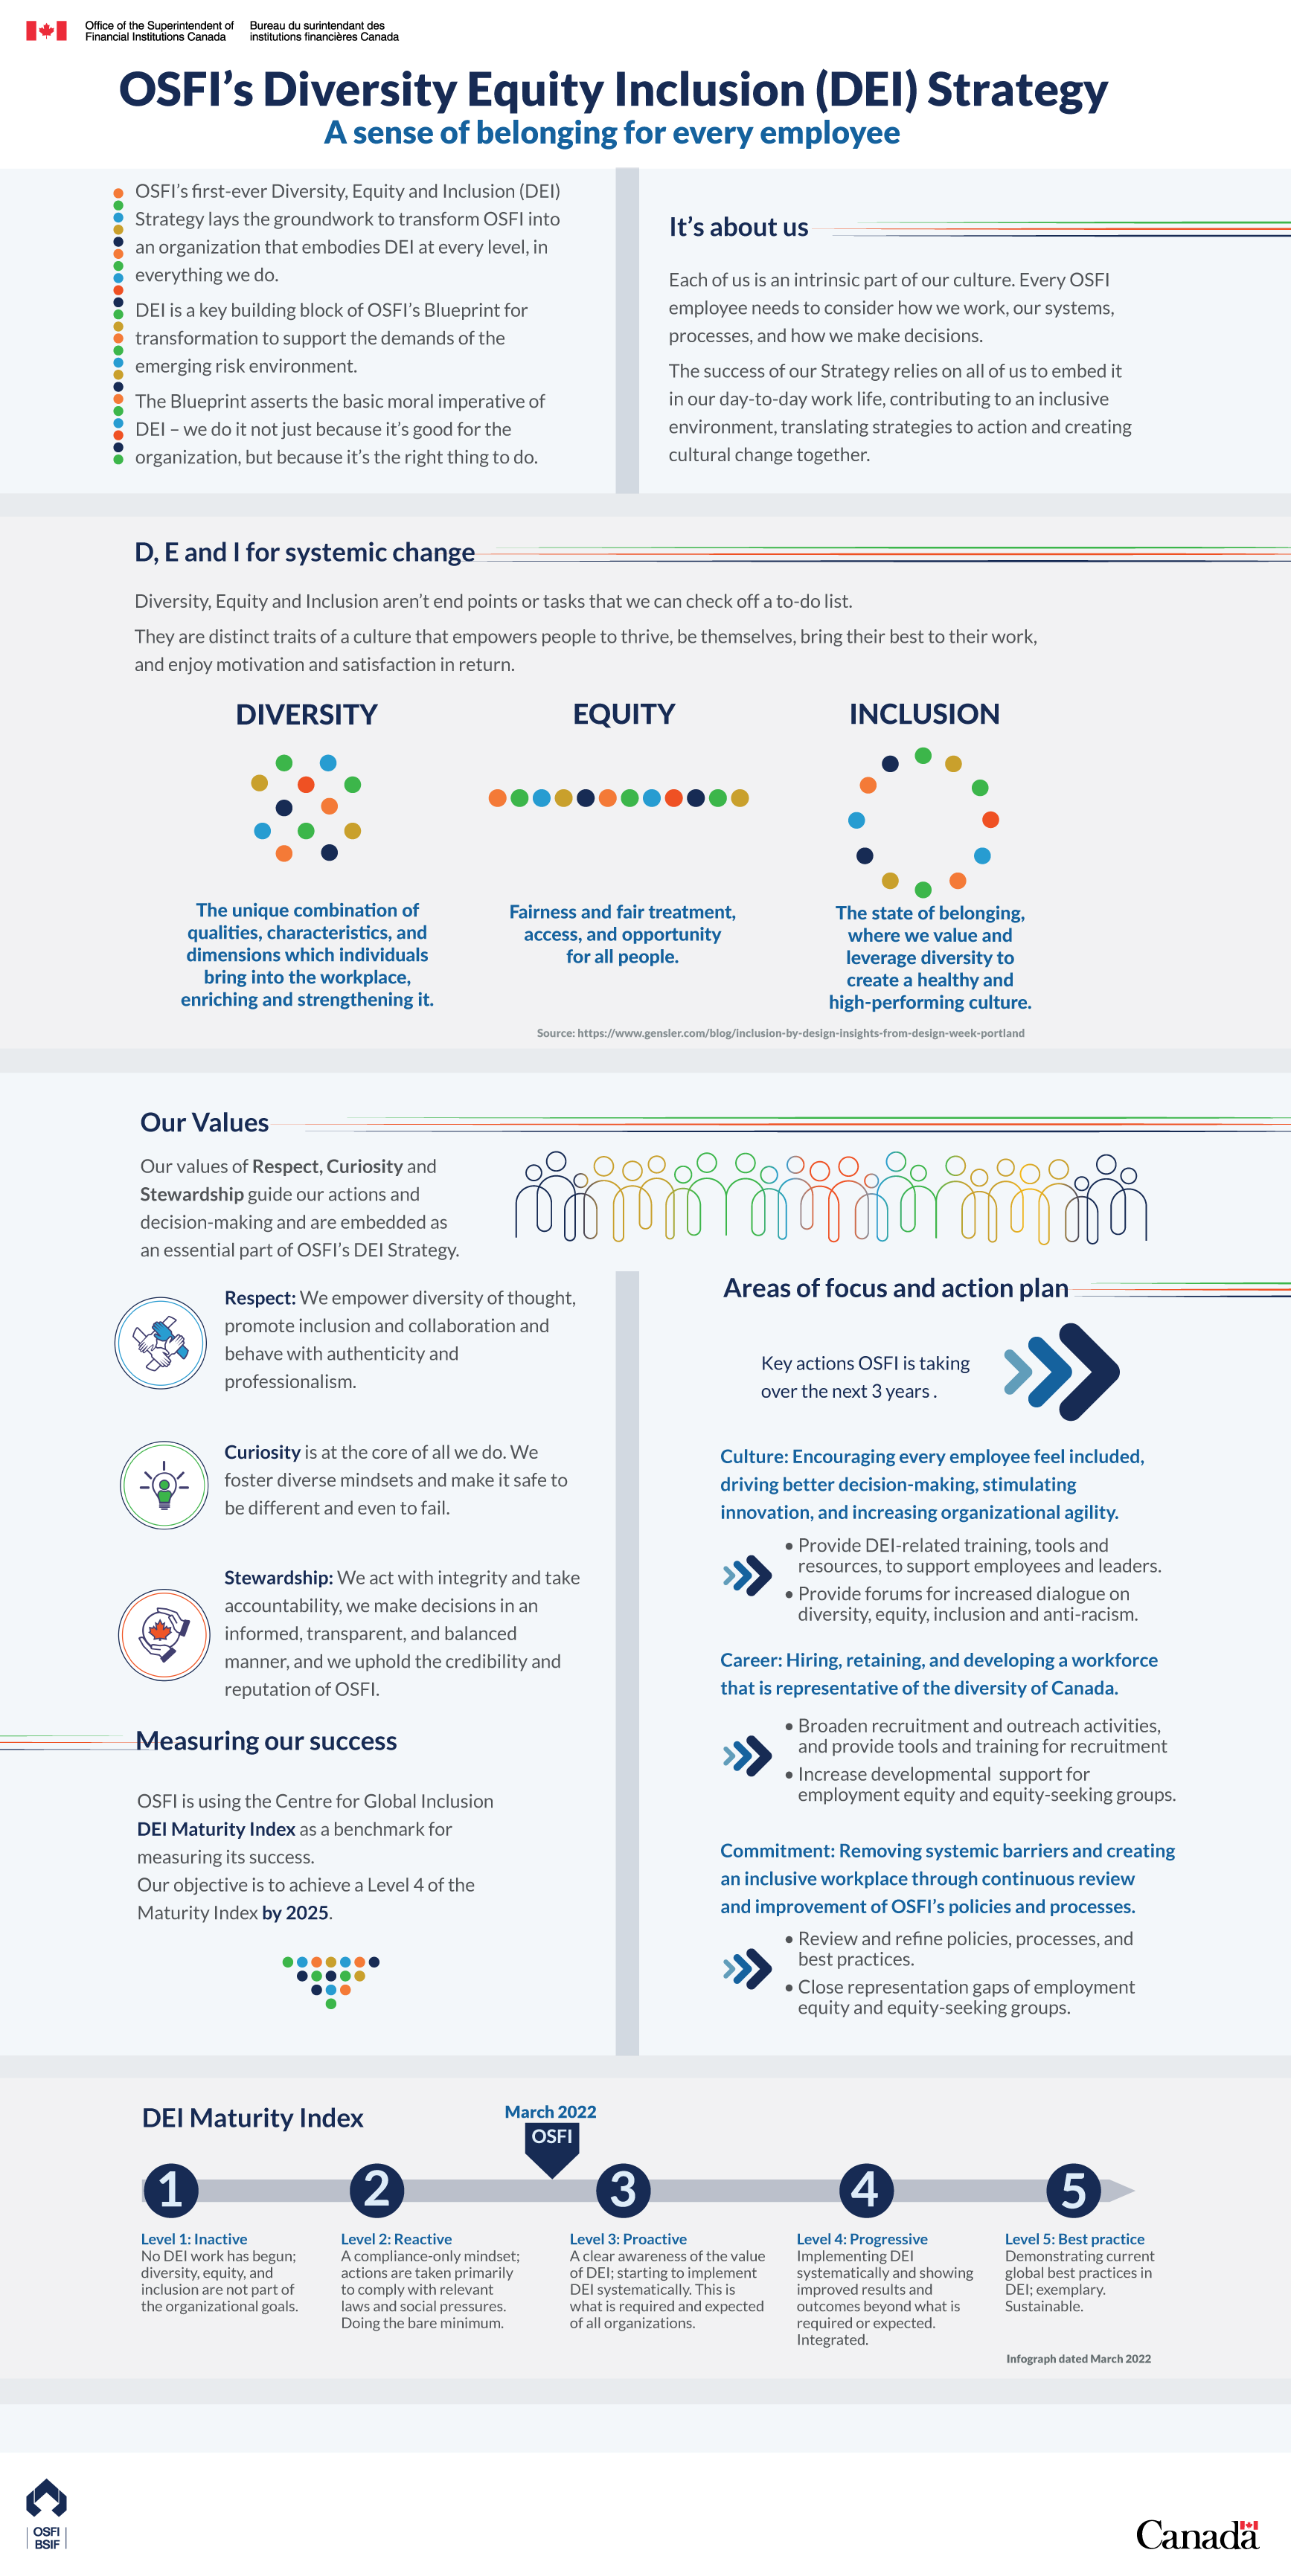 Diversity, Equity and Inclusion Strategy Infographic